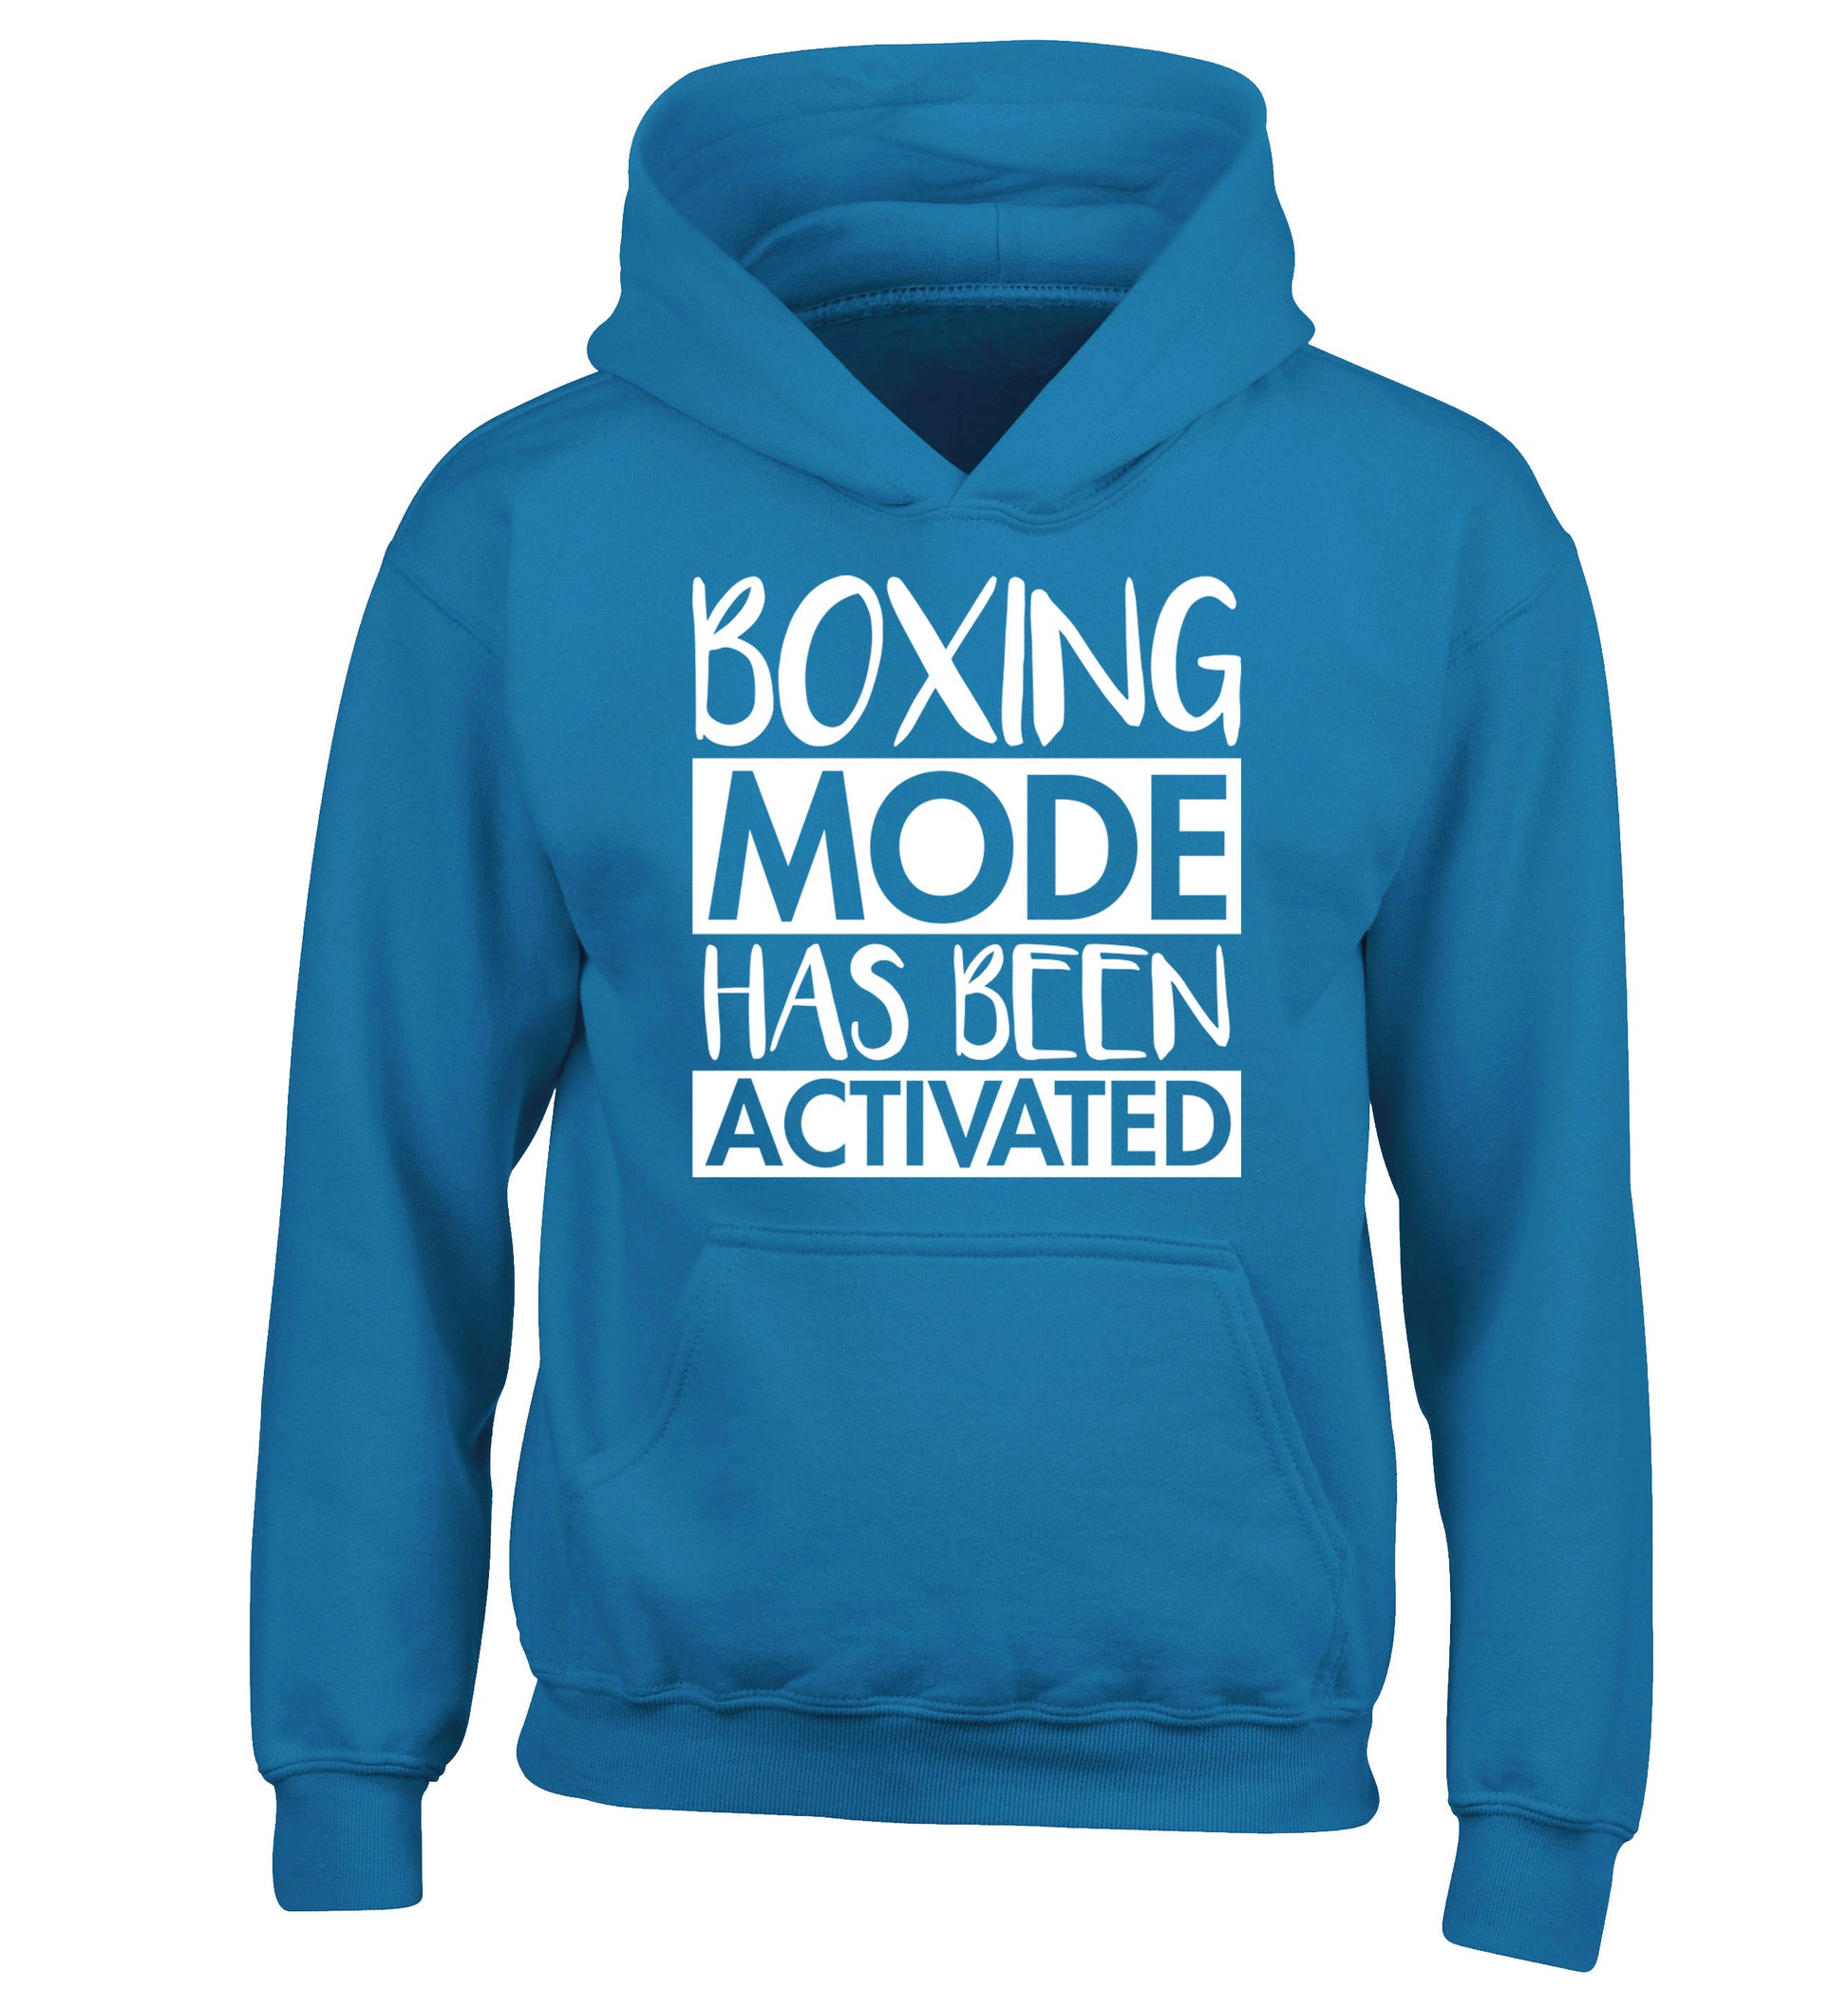 Boxing mode activated children's blue hoodie 12-14 Years